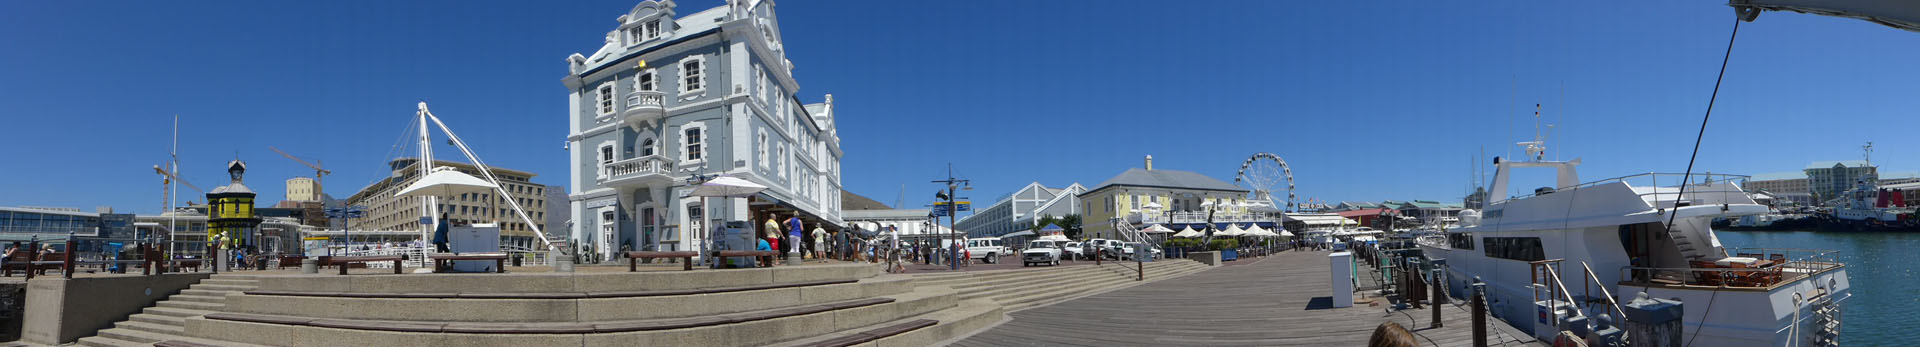 Victoria & Alfred Waterfront - Cape Town - South Africa